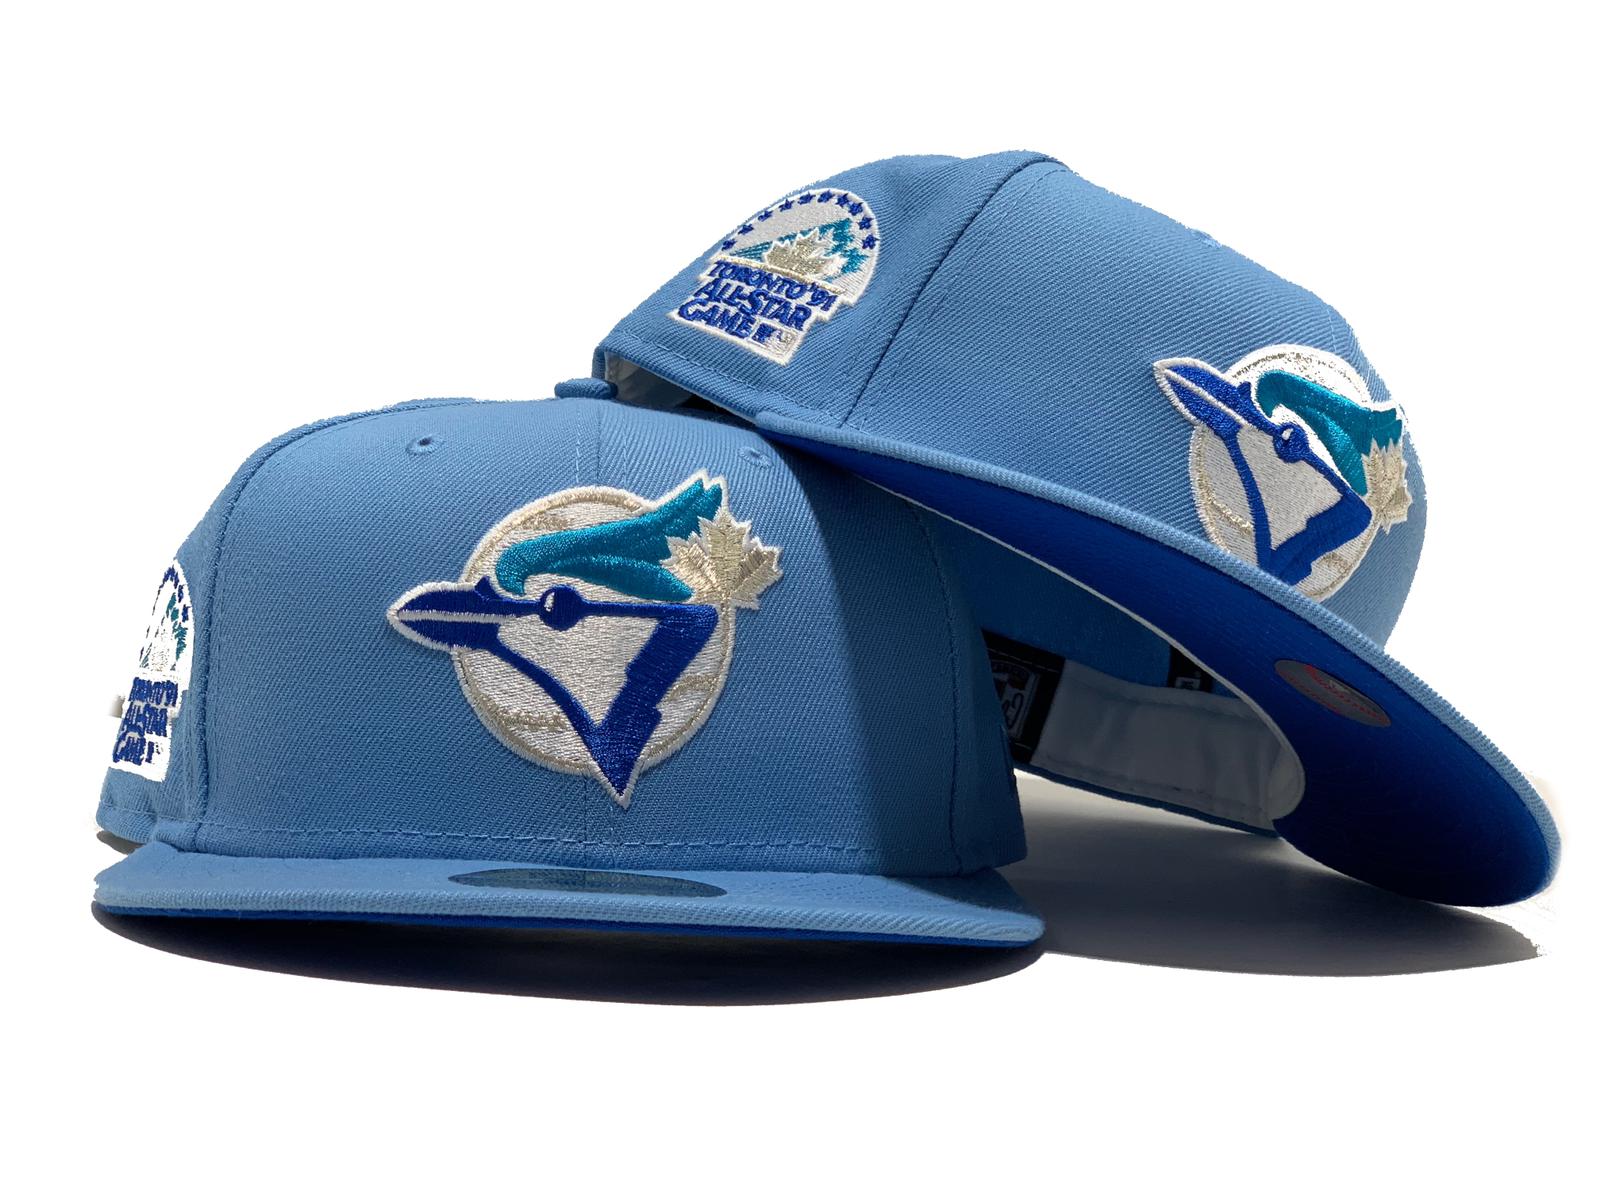 Toronto Blue Jays - We will be wearing these special hats tonight